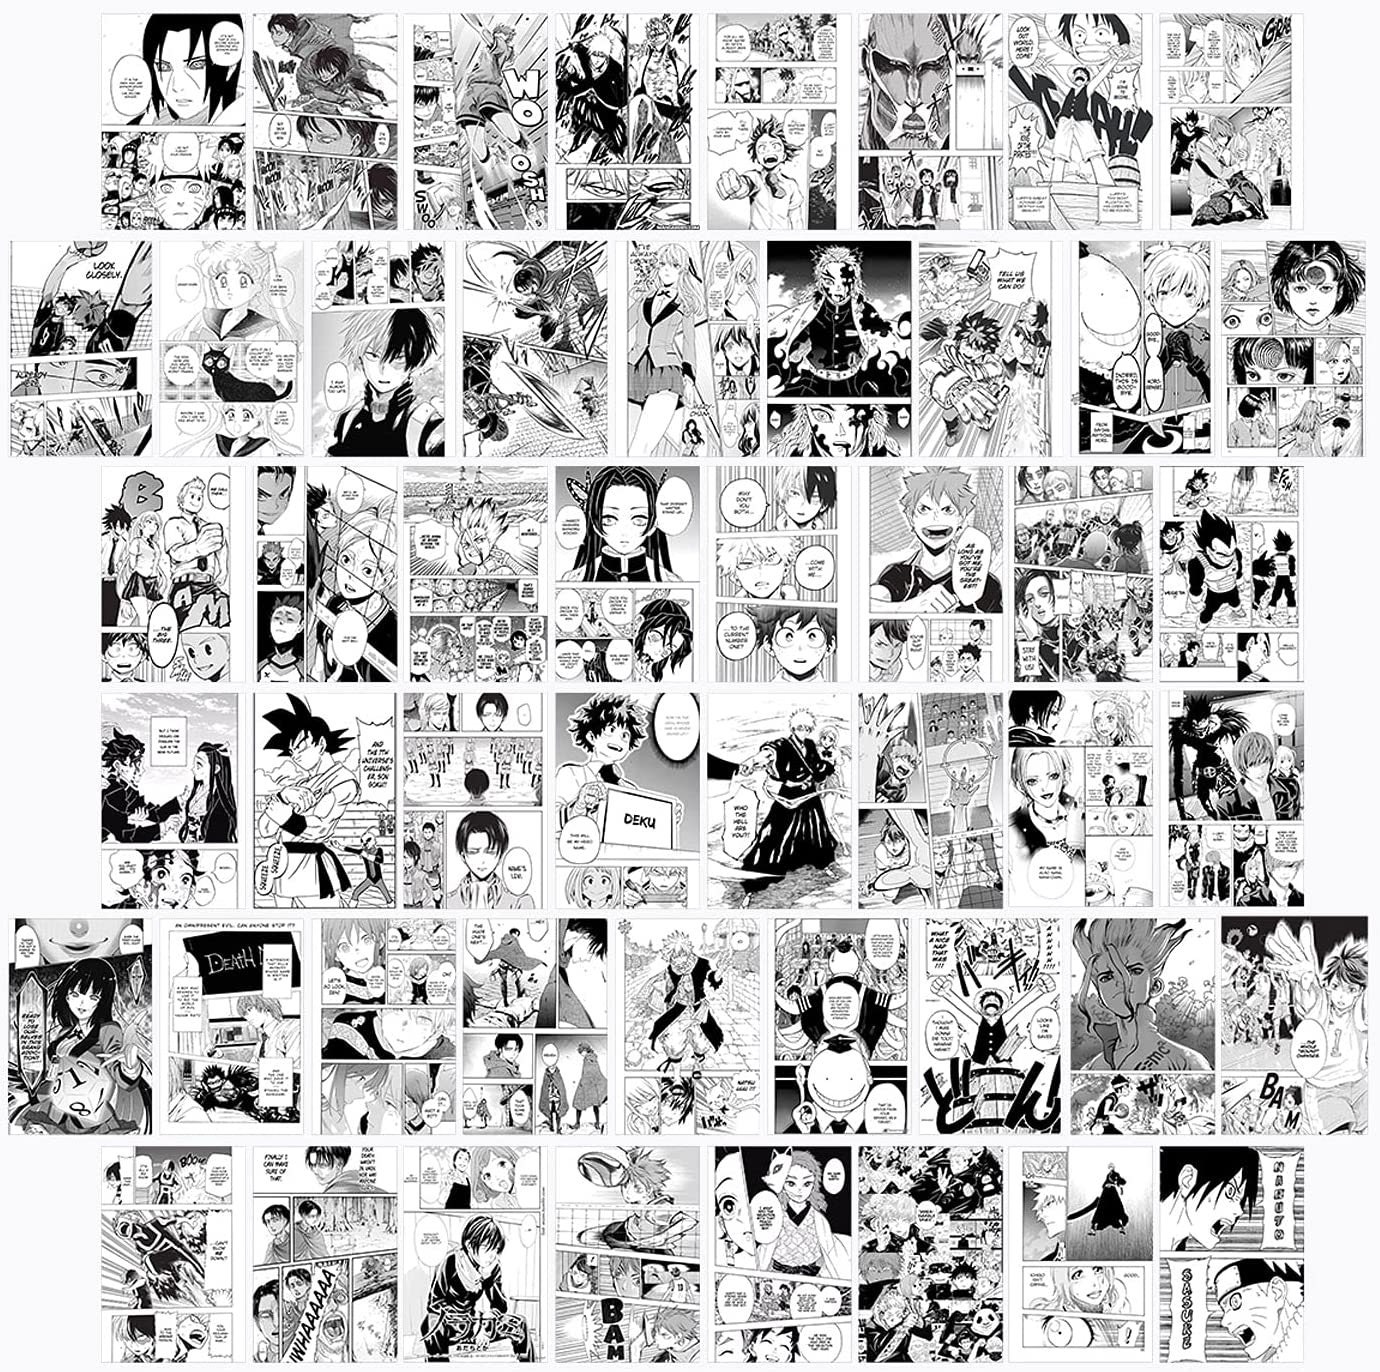  MeleBase Anime Wall Collage Kit Aesthetic 60 PCS Anime Room  Decor 4.2x6.2 inch Small Anime Posters Manga Collage Kit, Anime Pictures  for Wall Collage Kit (Art Deco): Posters & Prints